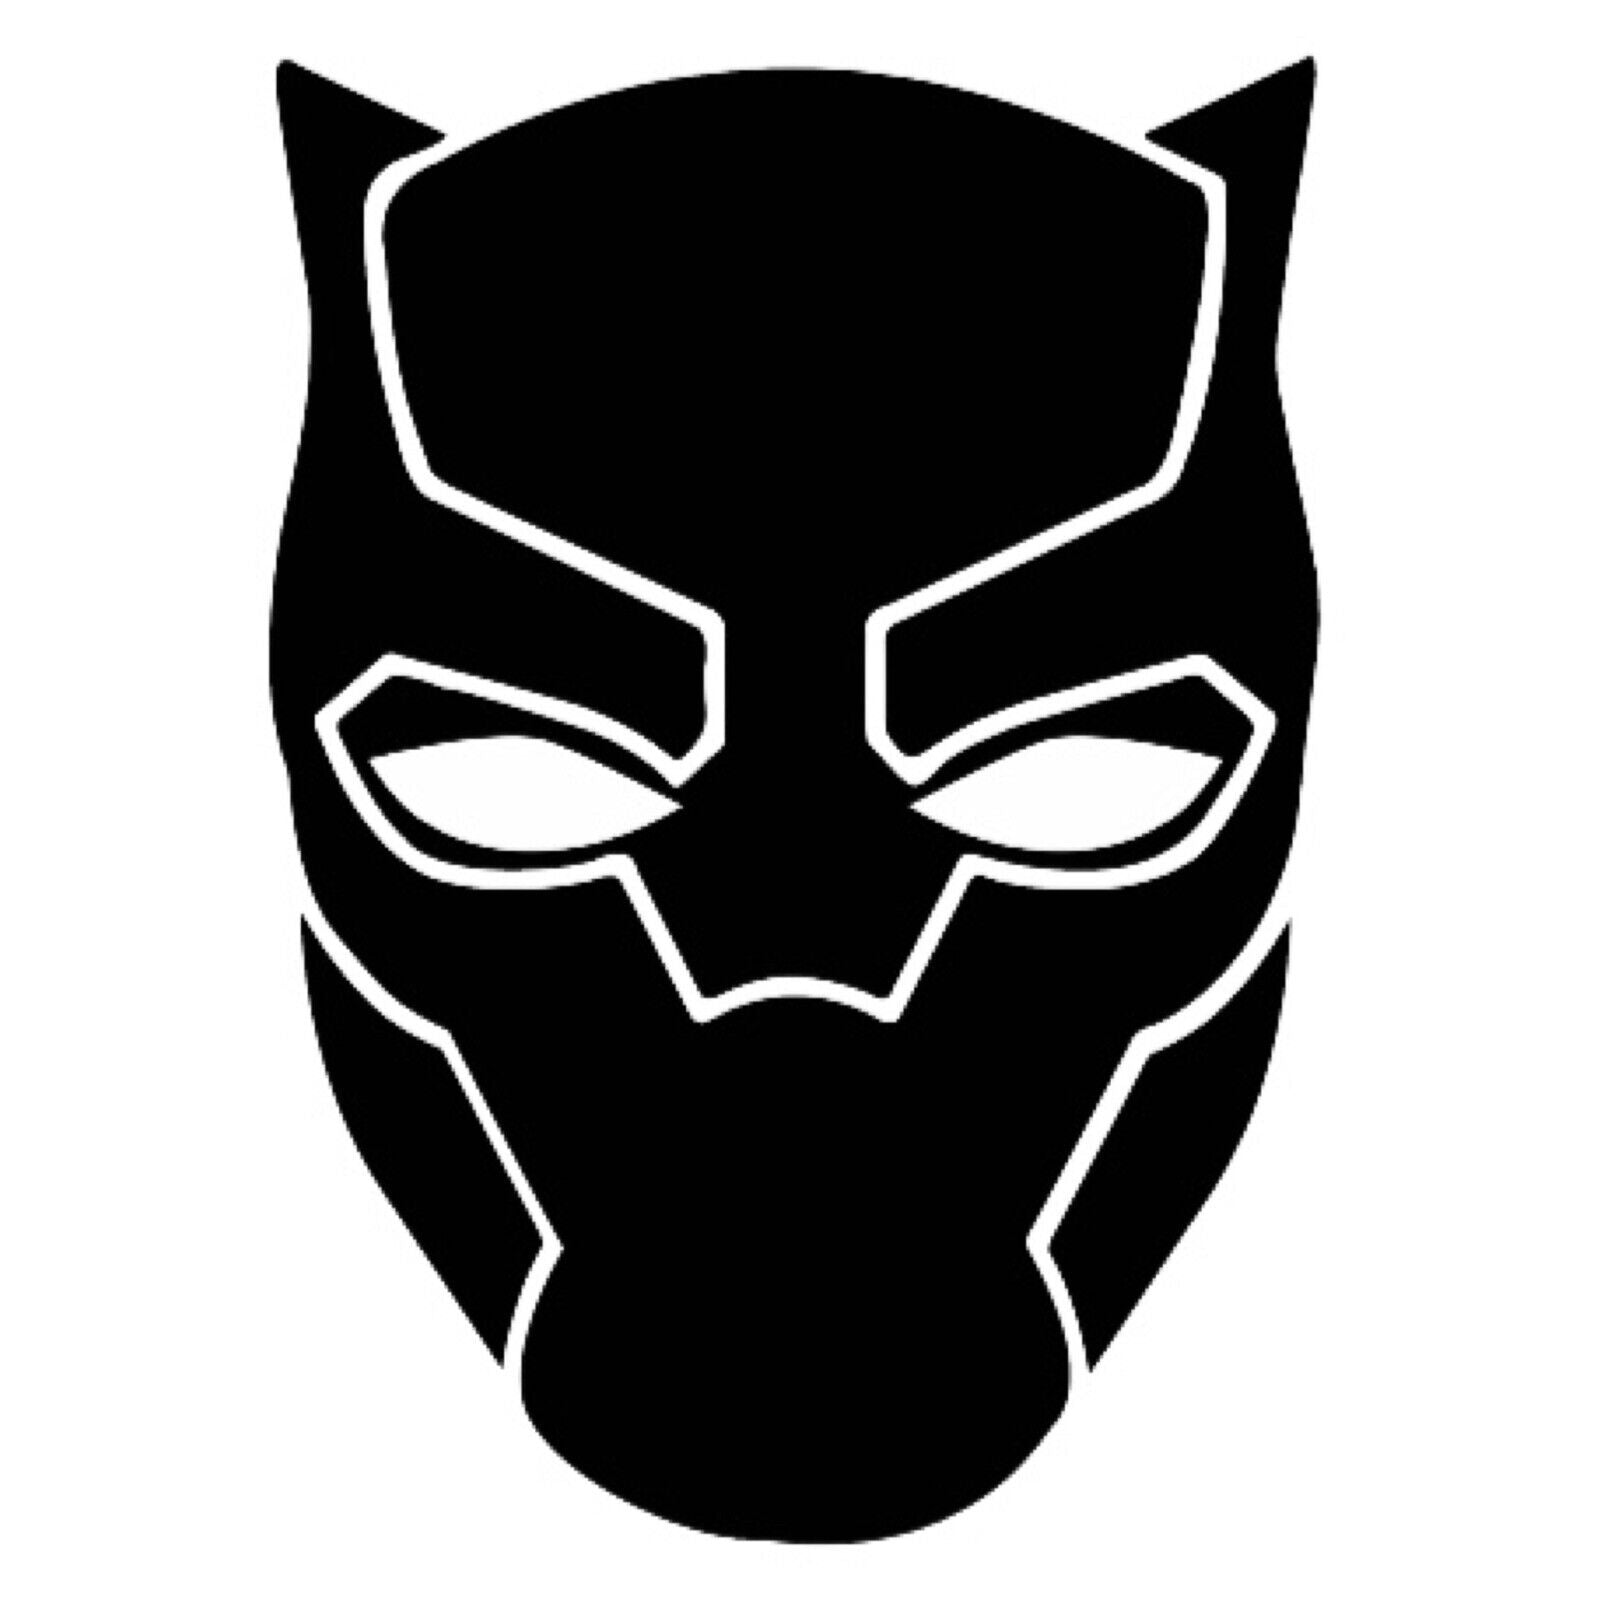 Vivicraft Cake Decoration for Black Panther Birthday Cake Topper for Boy,  Glitter Happy Birthday Cake Topper for Black Panther Themed Party, Kids  Adult Birthday Party, Marvel Fans Party Cake Déc : Amazon.ae: